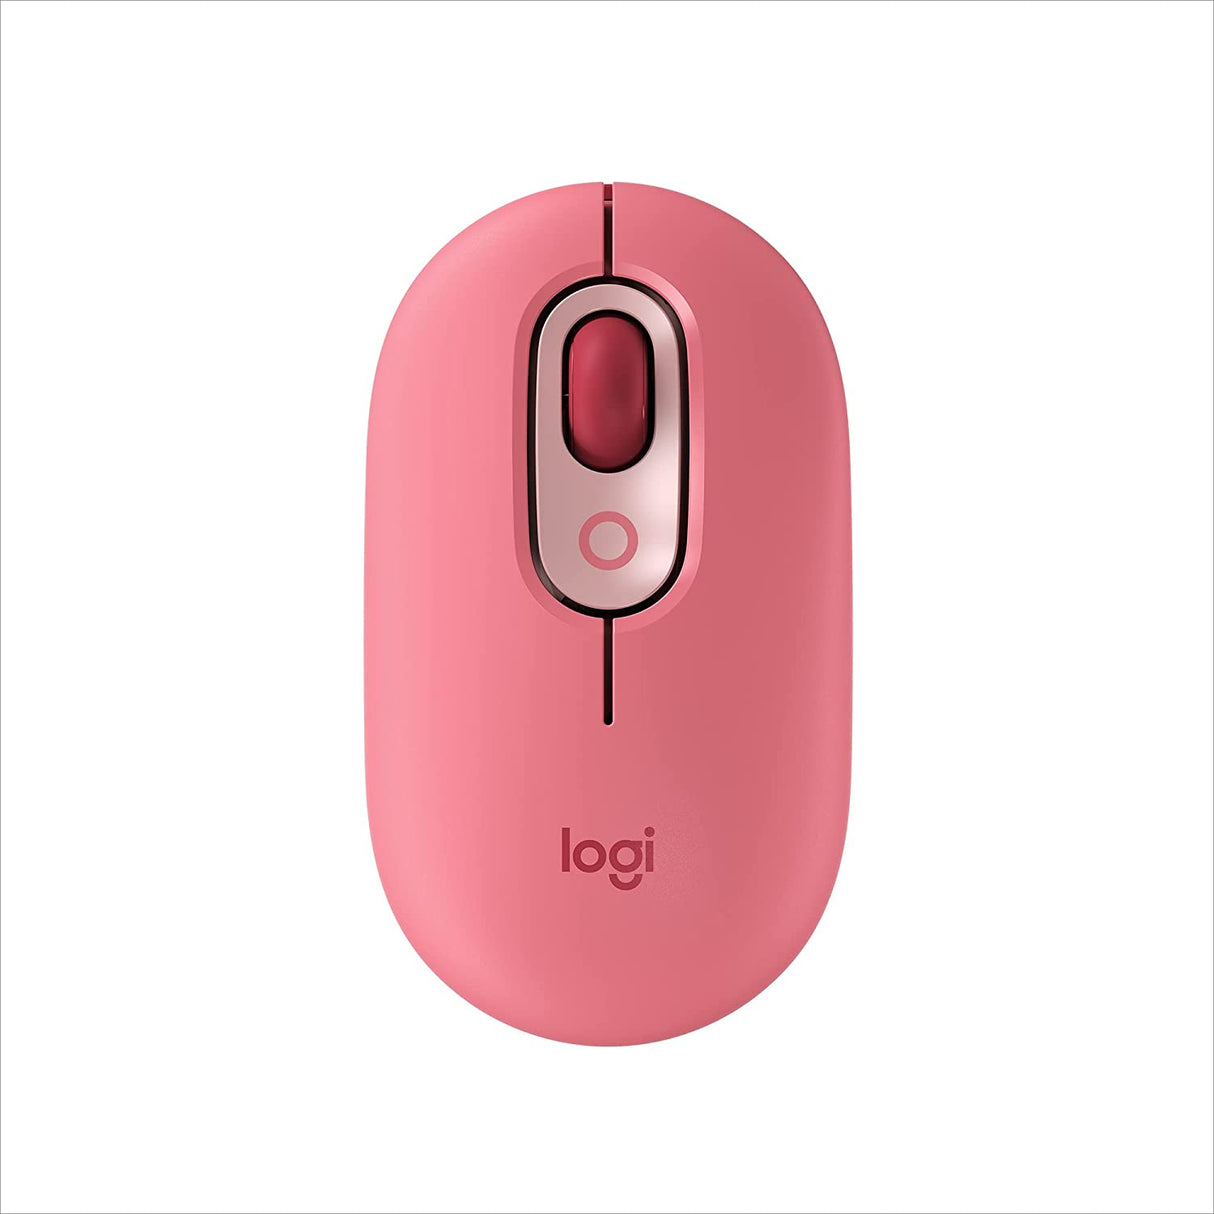 Logitech POP Mouse, Wireless Mouse with Customizable Emojis, SilentTouch Technology, Precision/Speed Scroll, Compact Design, Bluetooth, Multi-Device, OS Compatible - Heartbreaker Rose Heartbreaker Rose POP Mouse